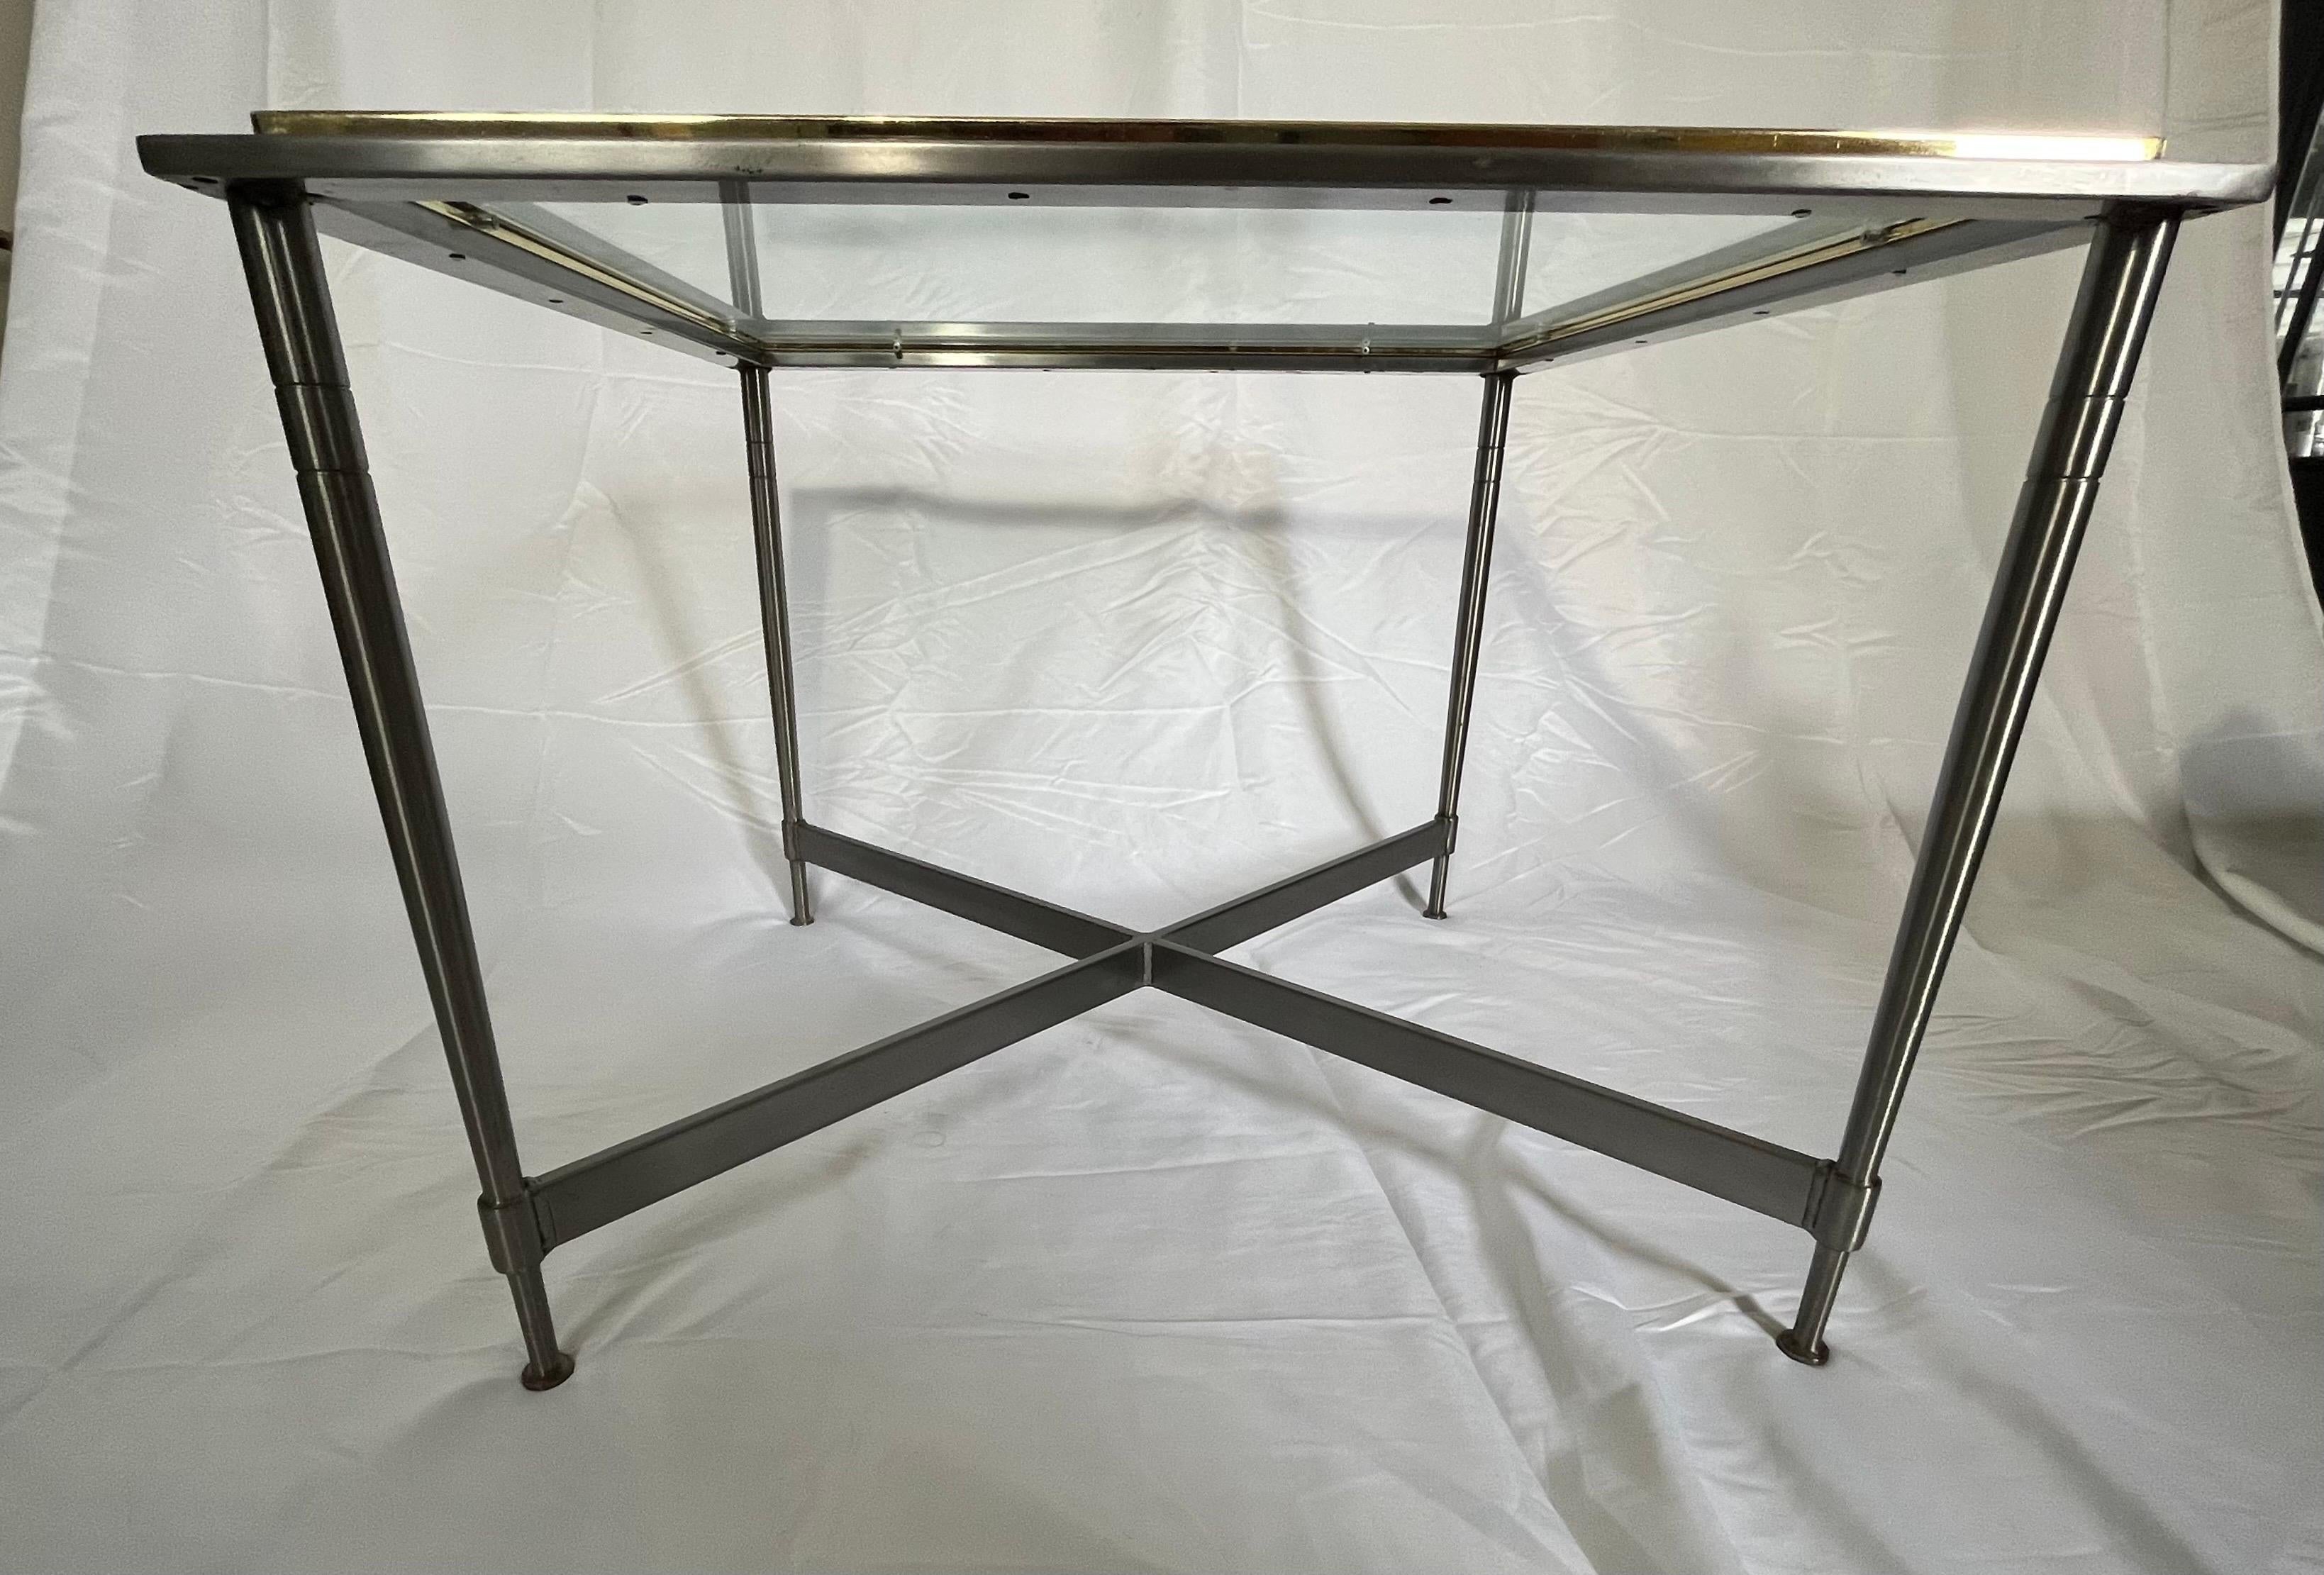 20th Century Modern Neoclassical Steel and Brass Table Jansen Style For Sale